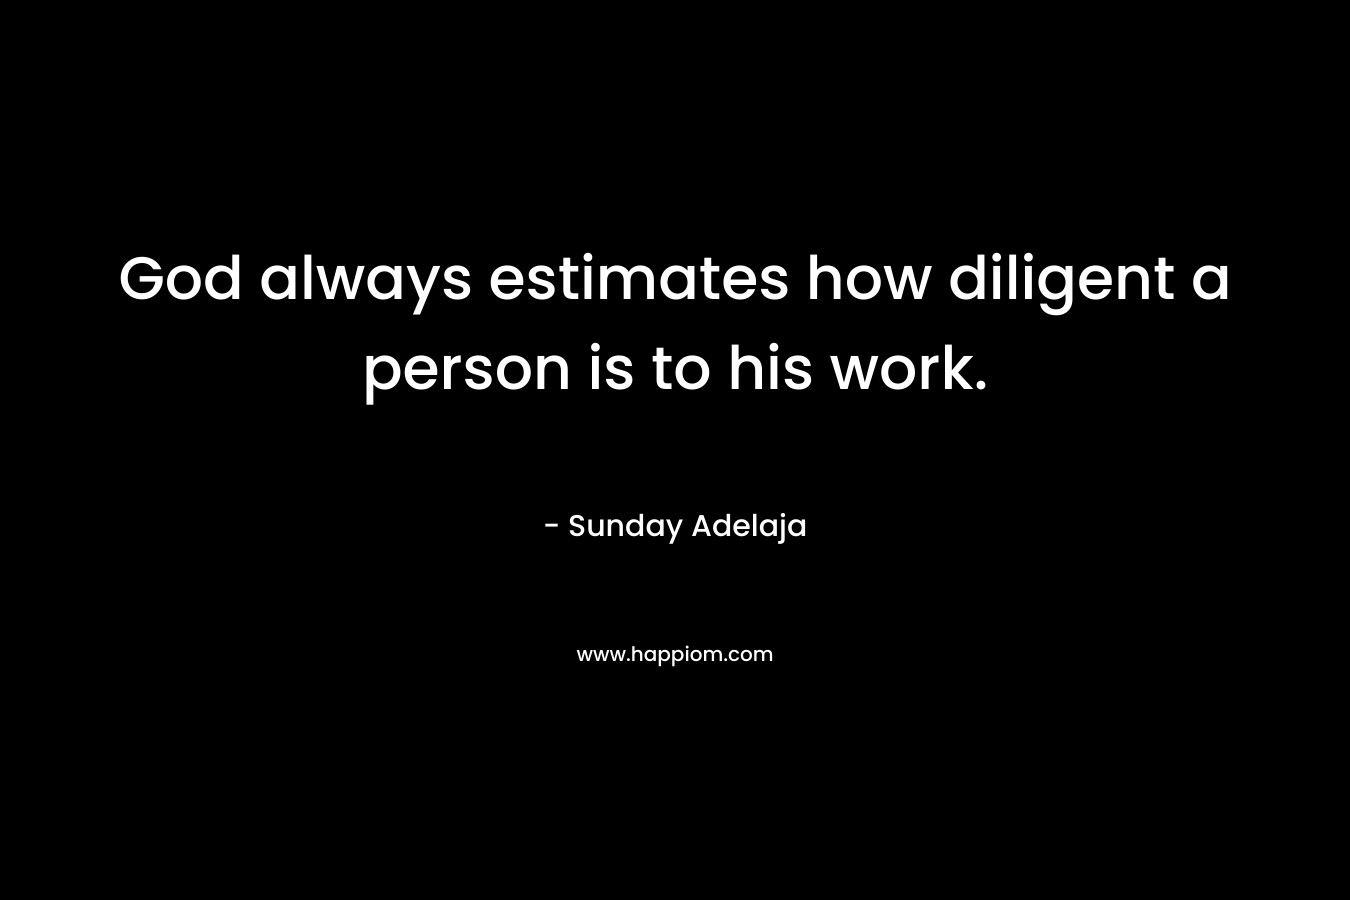 God always estimates how diligent a person is to his work.